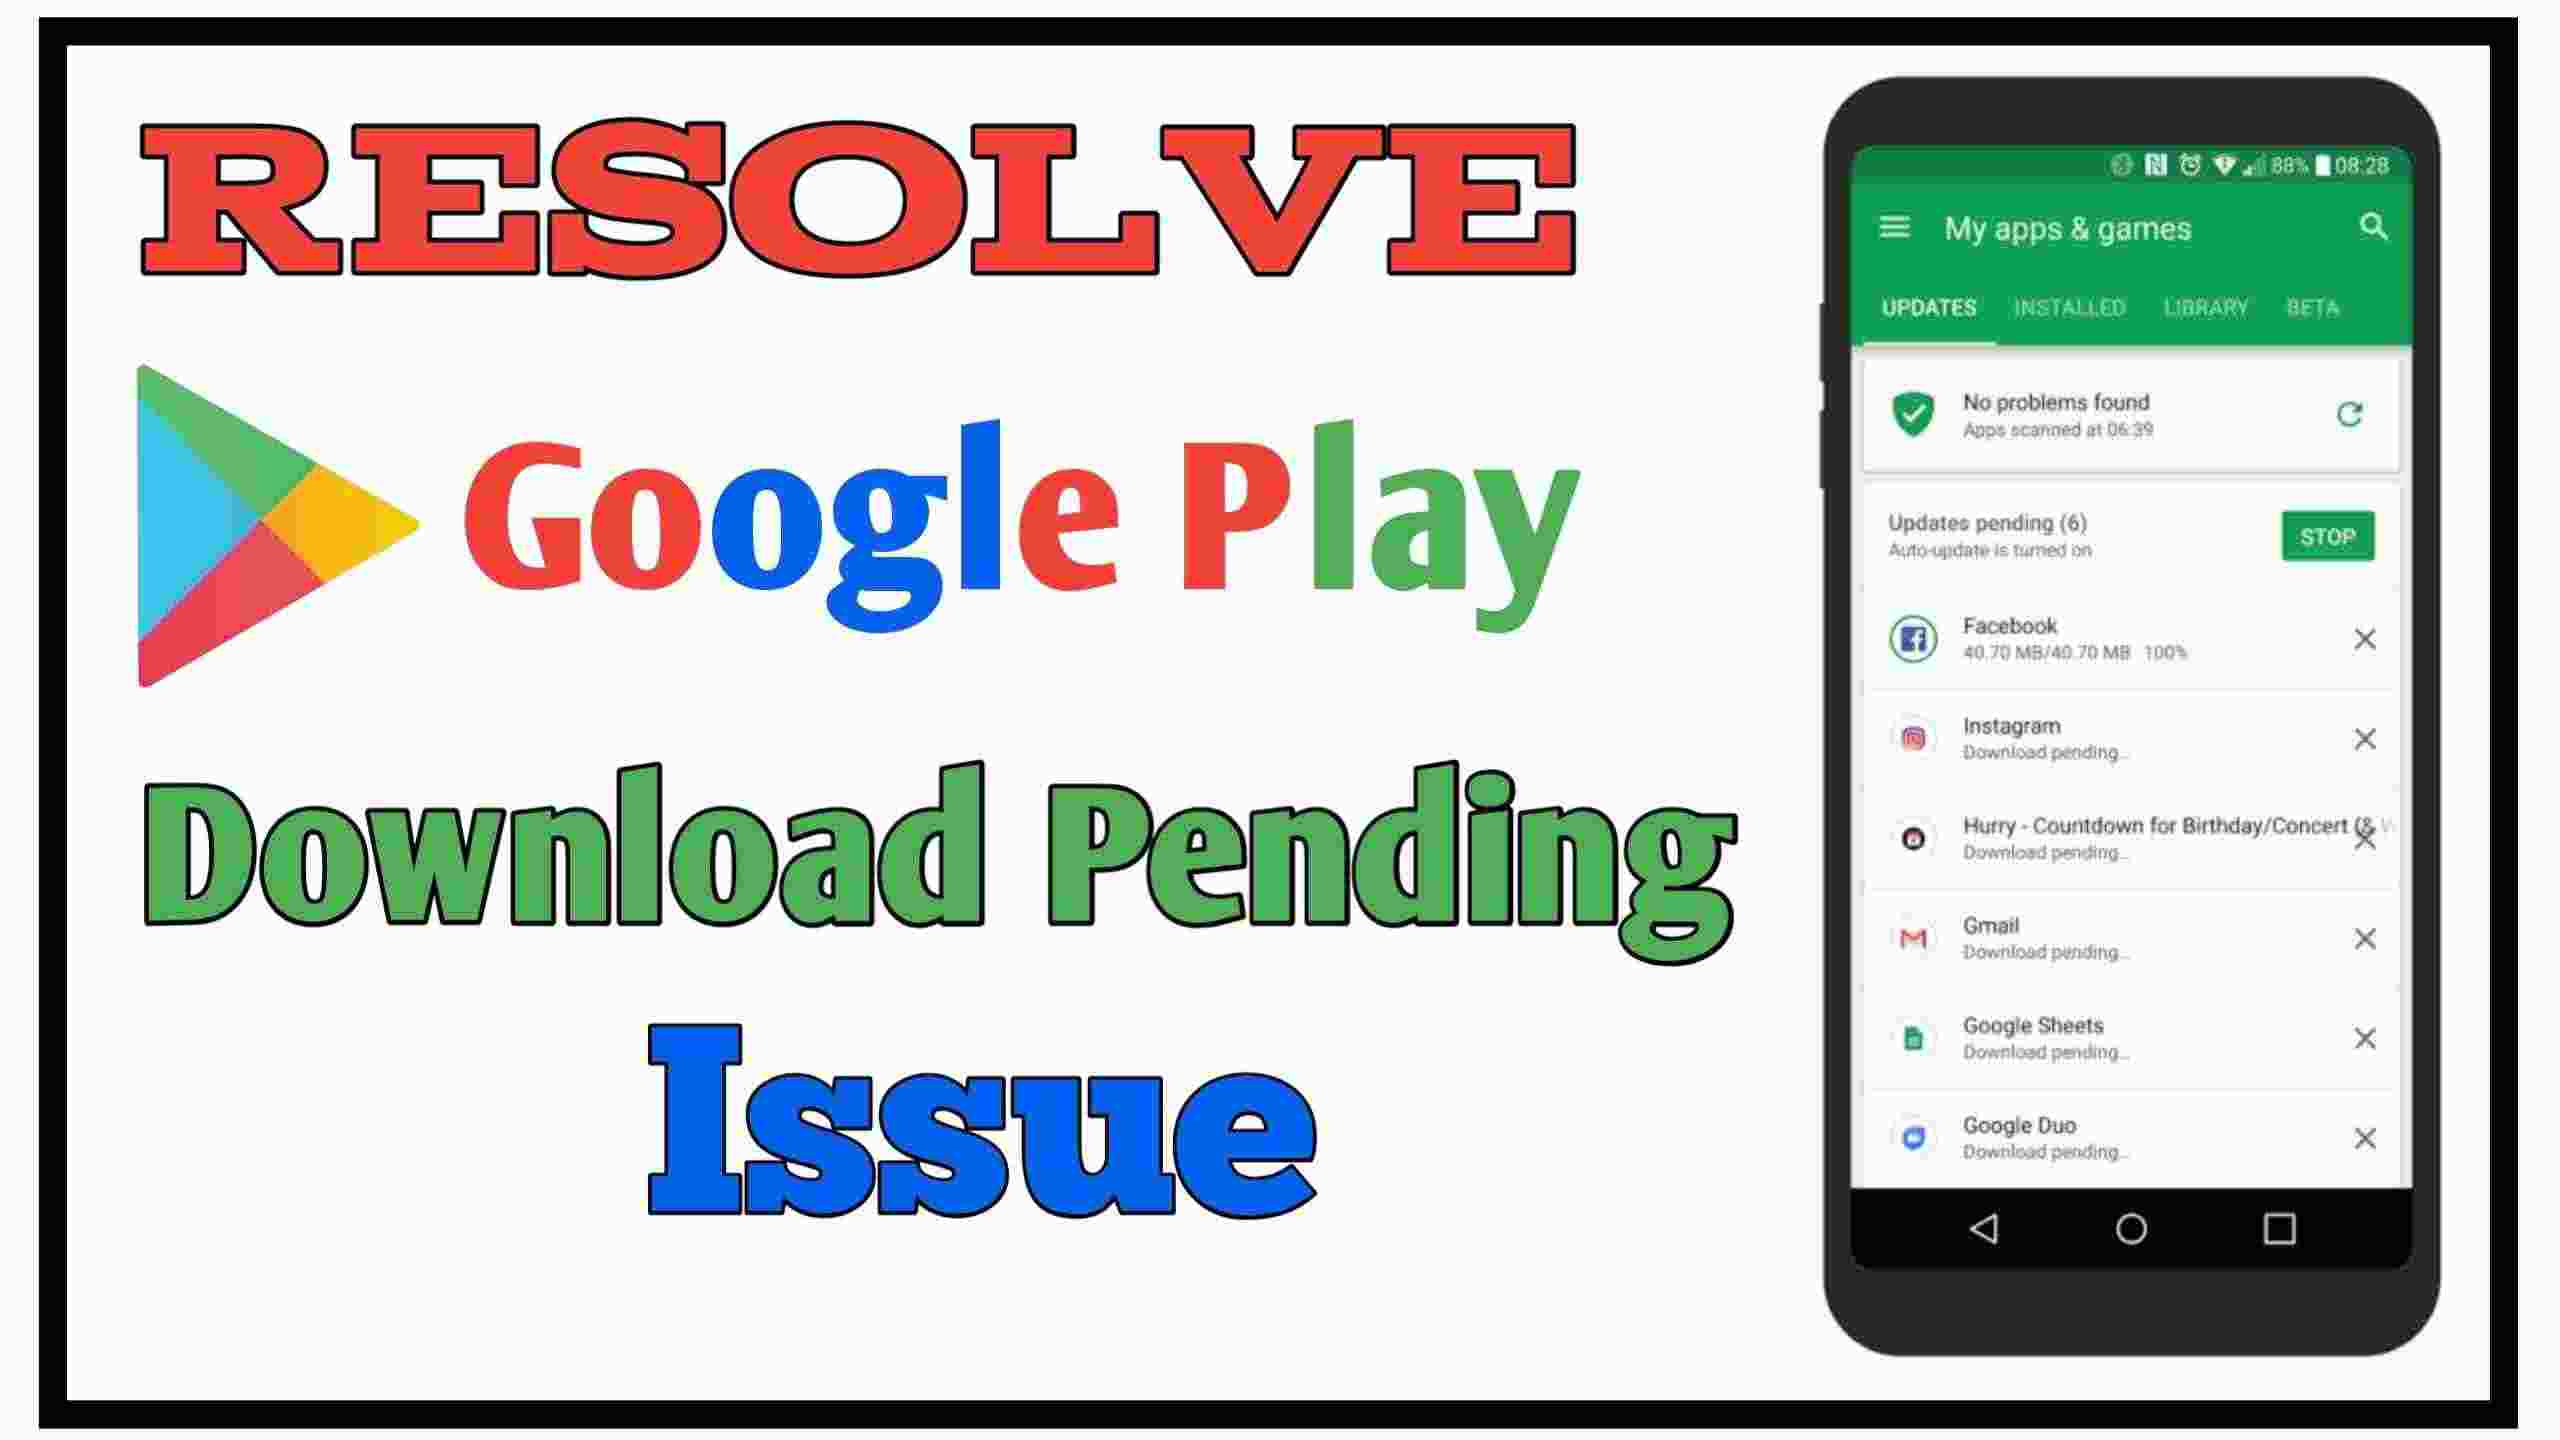 play store download pending 2020